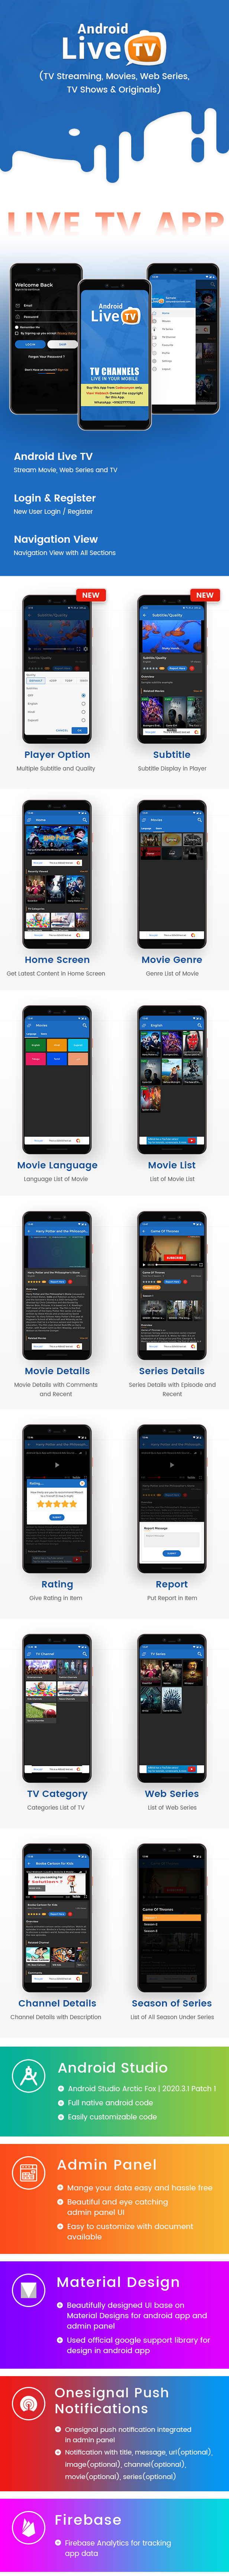 Android Live TV ( TV Streaming, Movies, Web Series, TV Shows & Originals) - 7